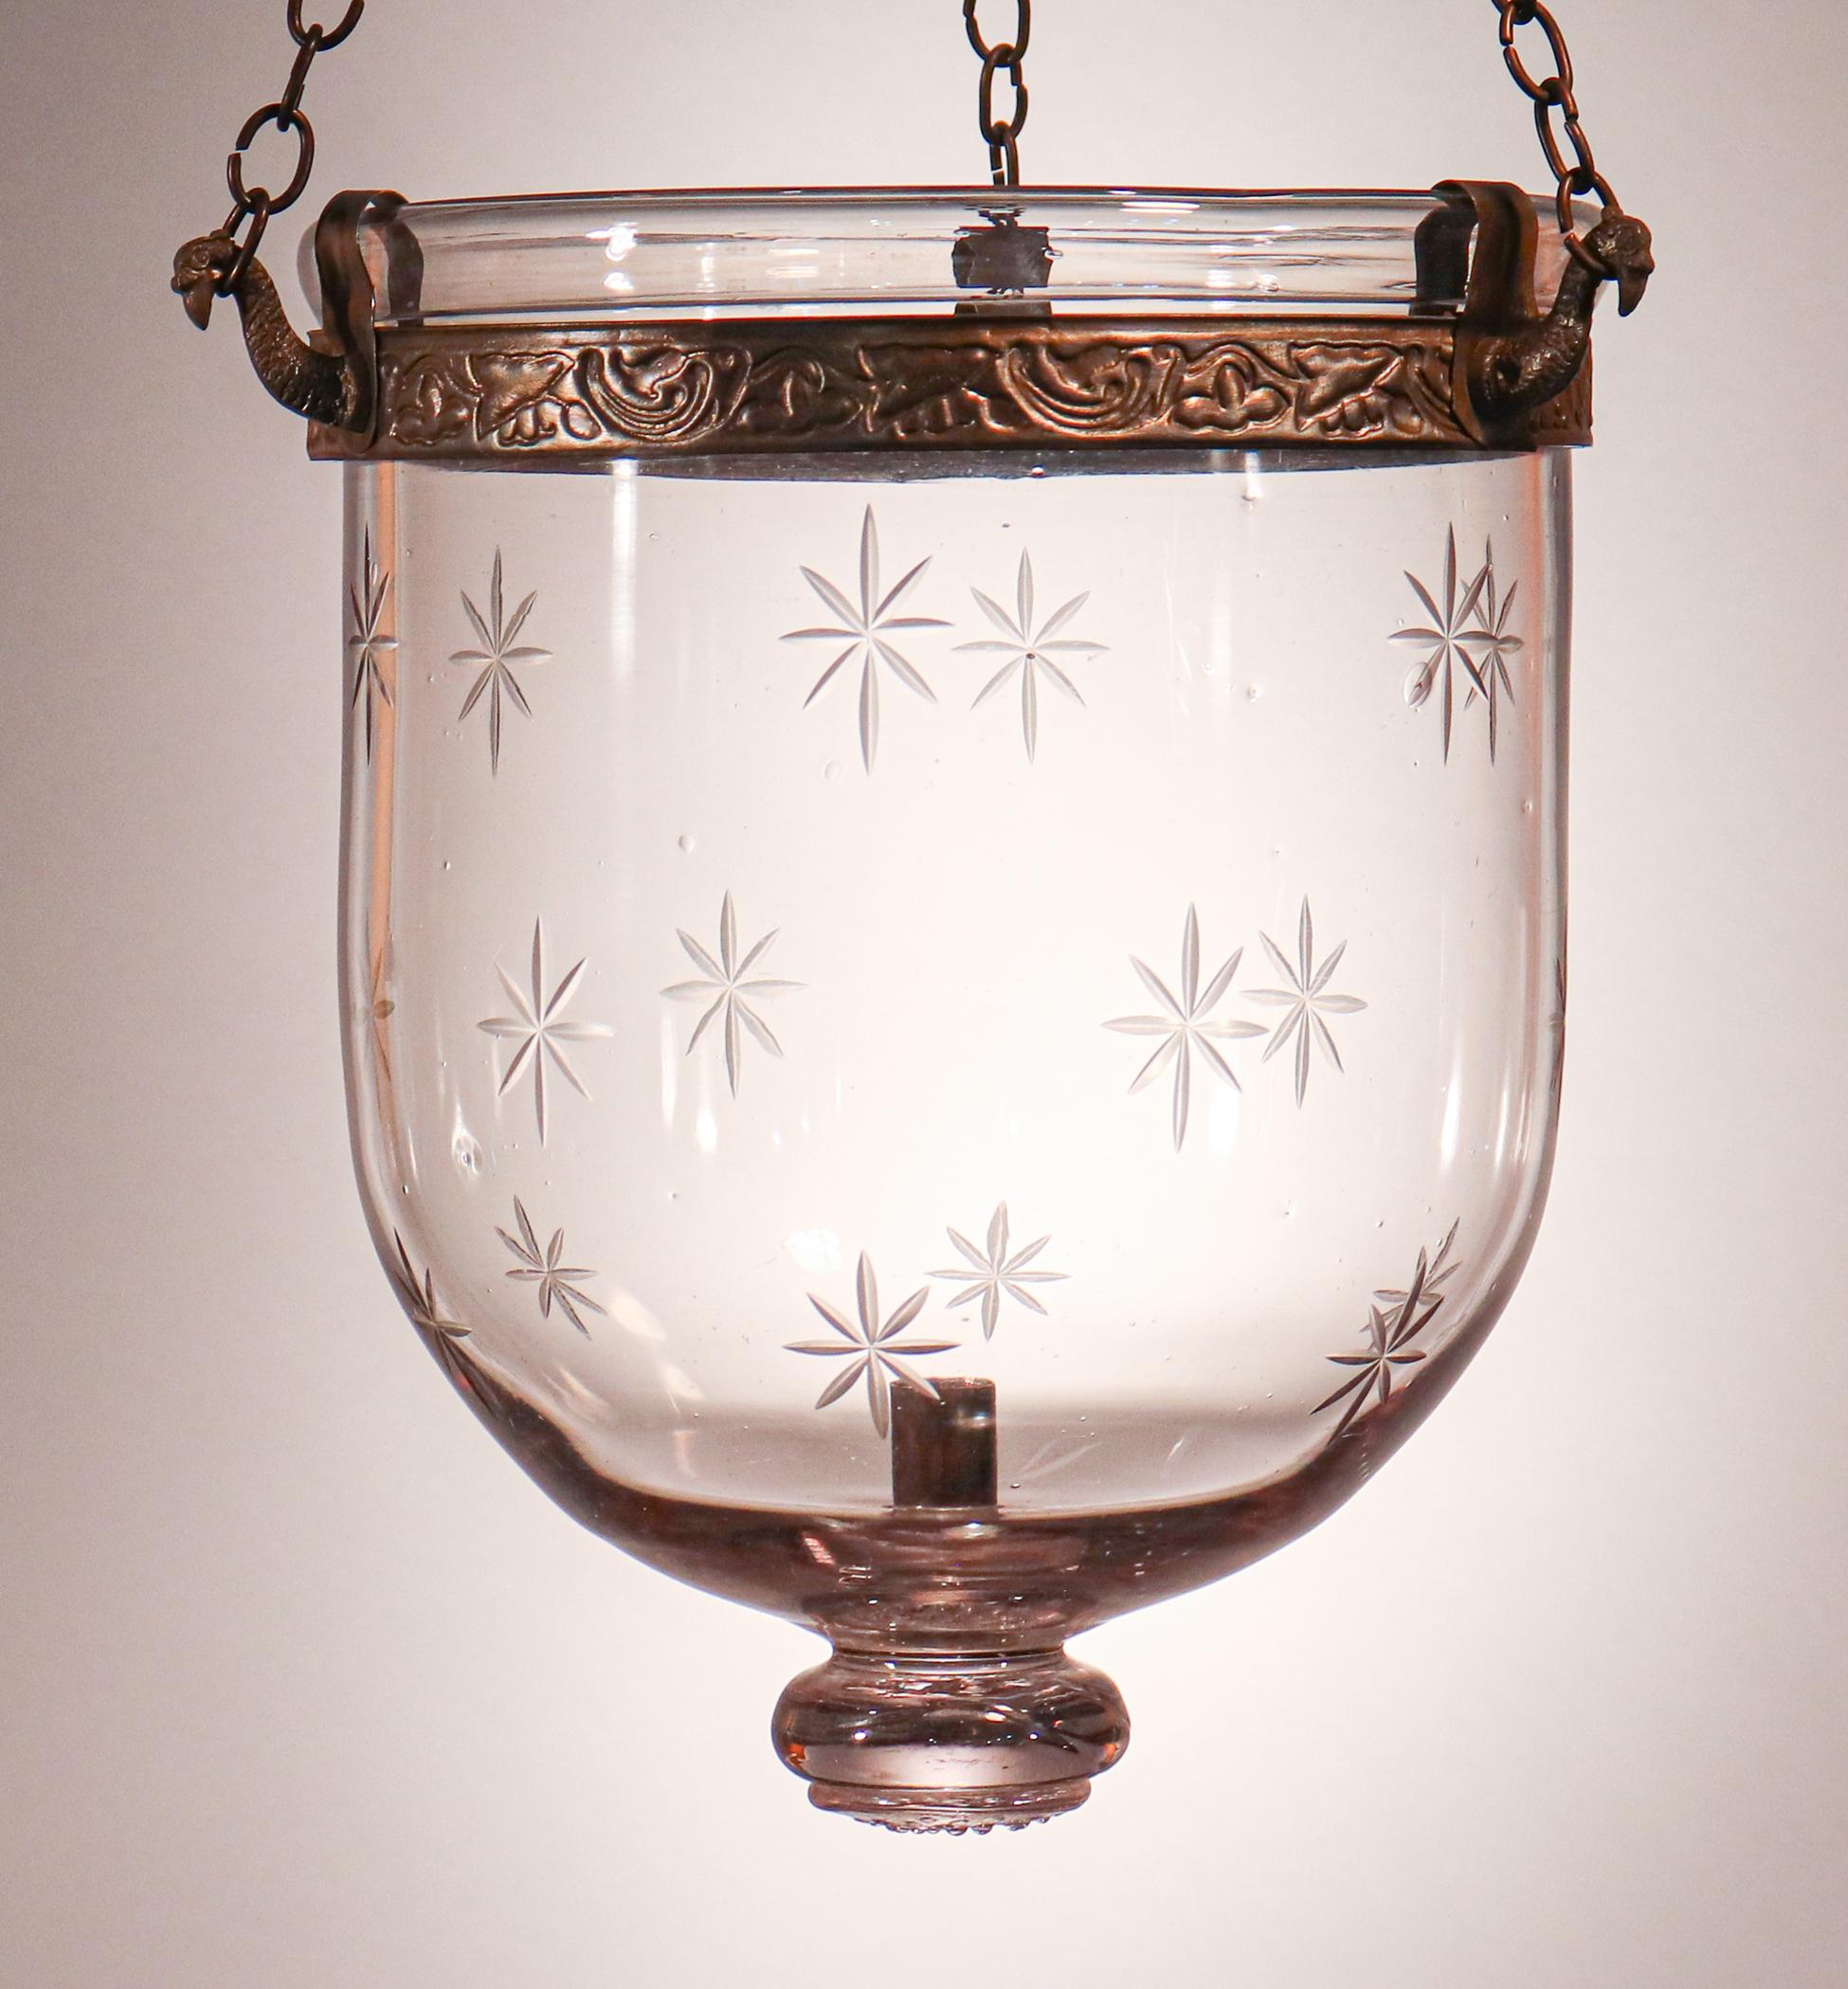 Antique Petite Bell Jar Lantern with Etched Stars 2